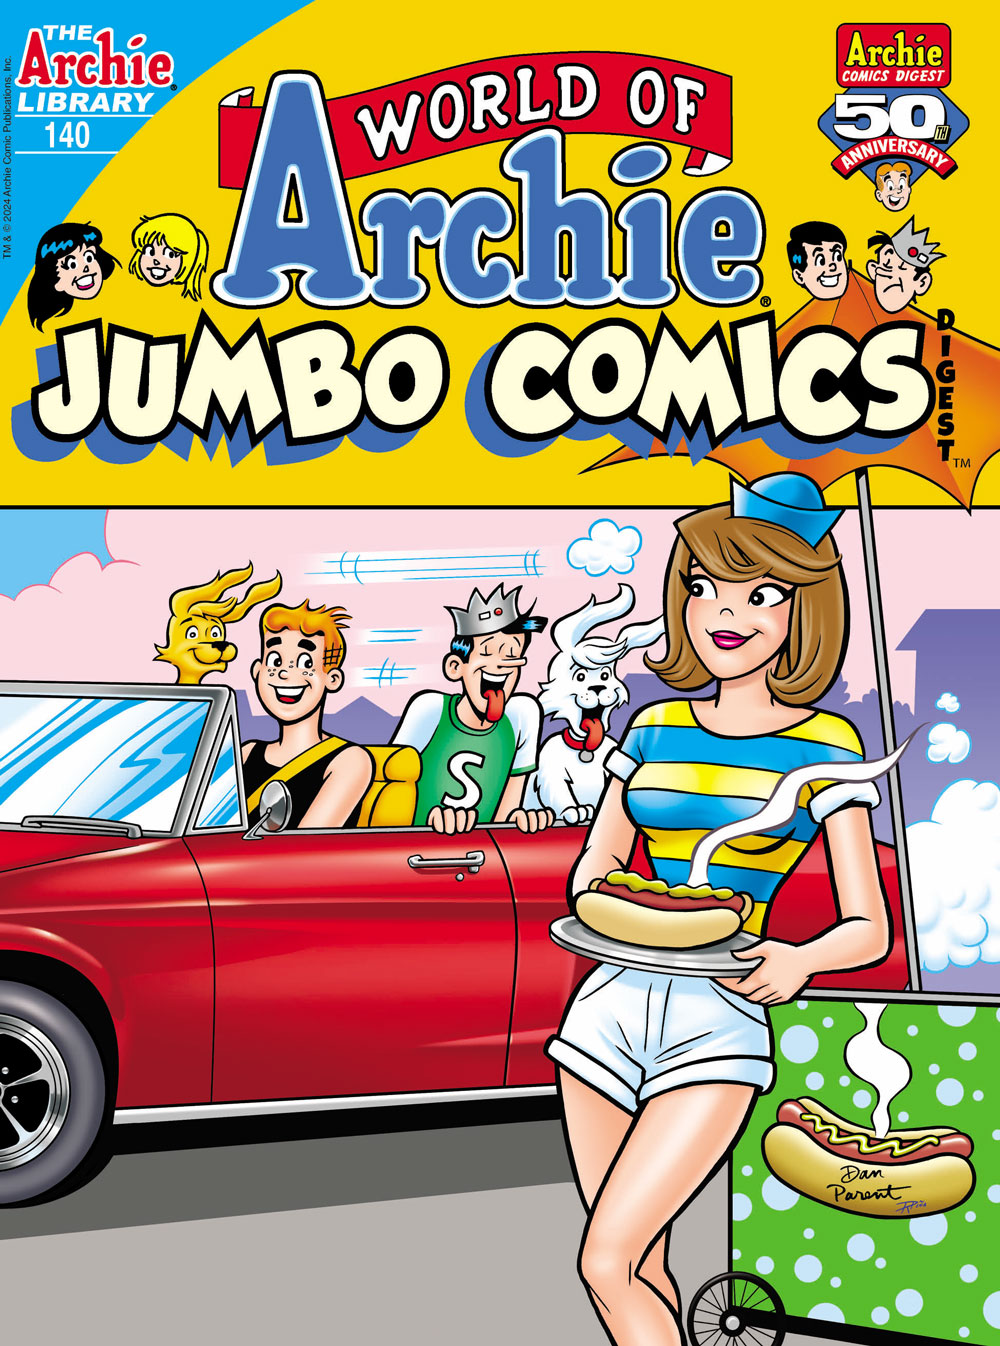 Archie, Jughead, and their two dogs Vegas and Hot Dog, drive by a woman running a hot dog stand. She's holding a hot dog with good smells pouring off of it. The boys and dogs all look on hungrily, and Jughead and Hot Dog both pant with their tongues out.